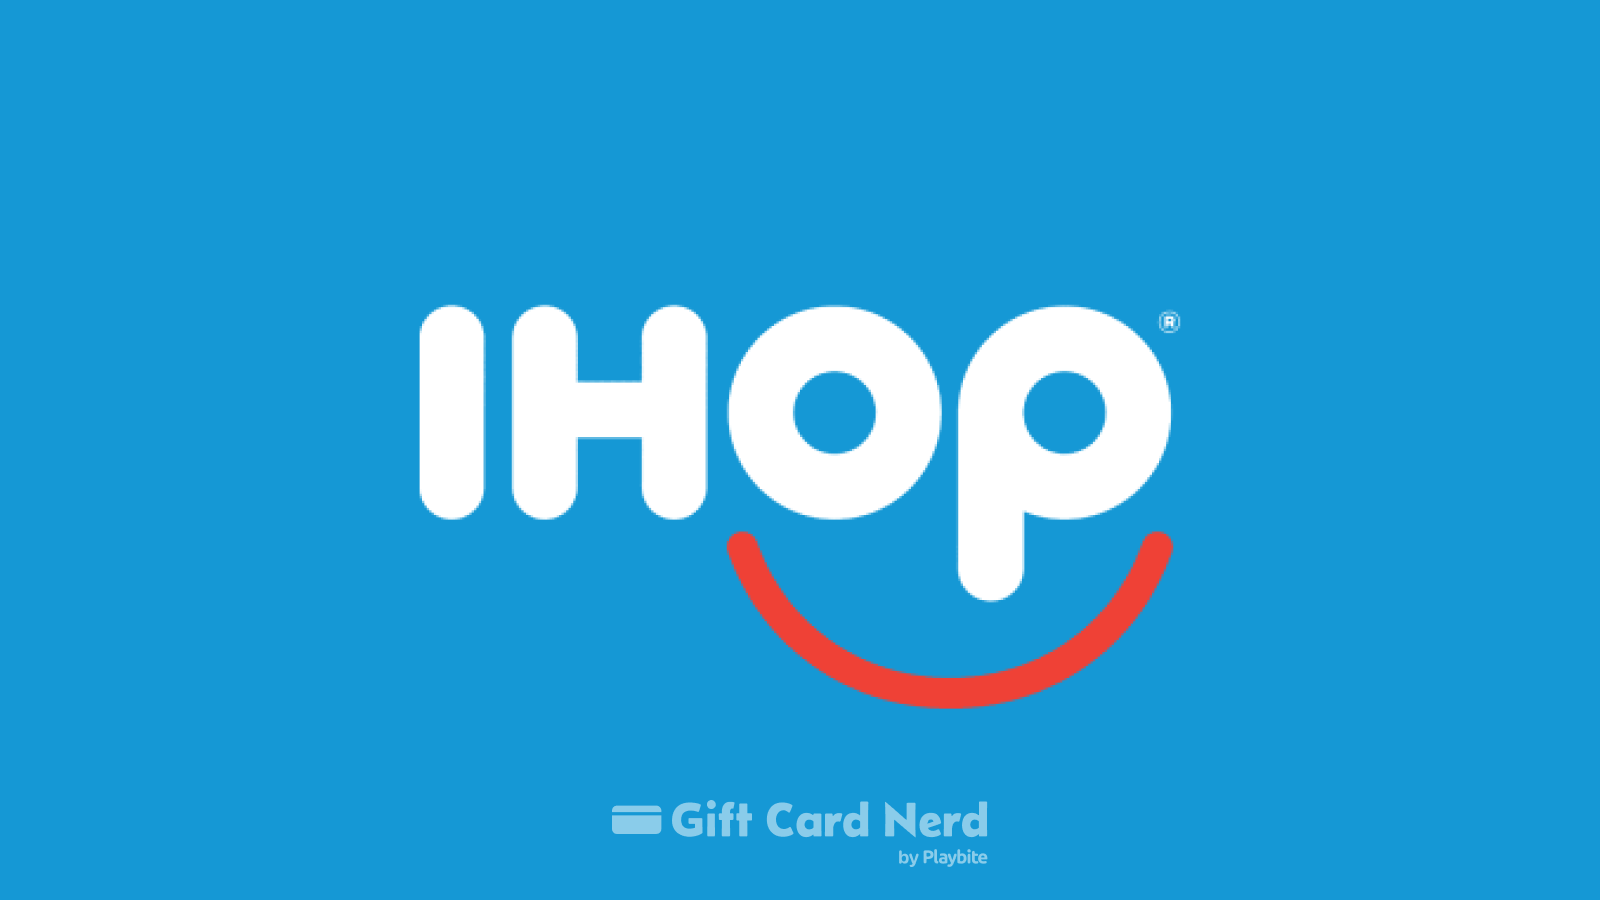 Does Walgreens sell IHOP gift cards?